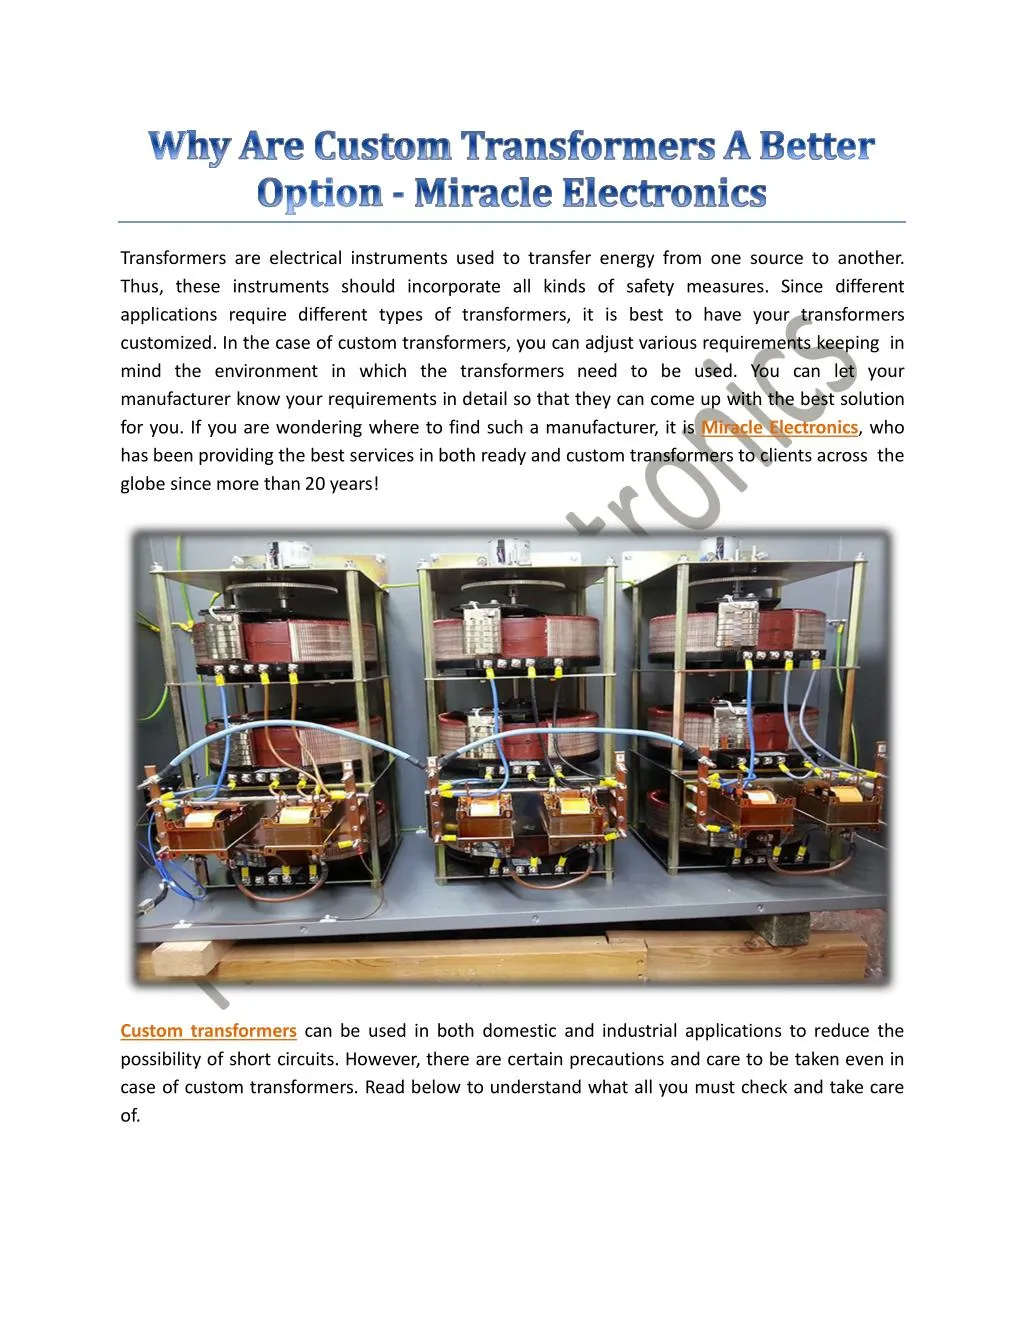 transformers are electrical instruments used